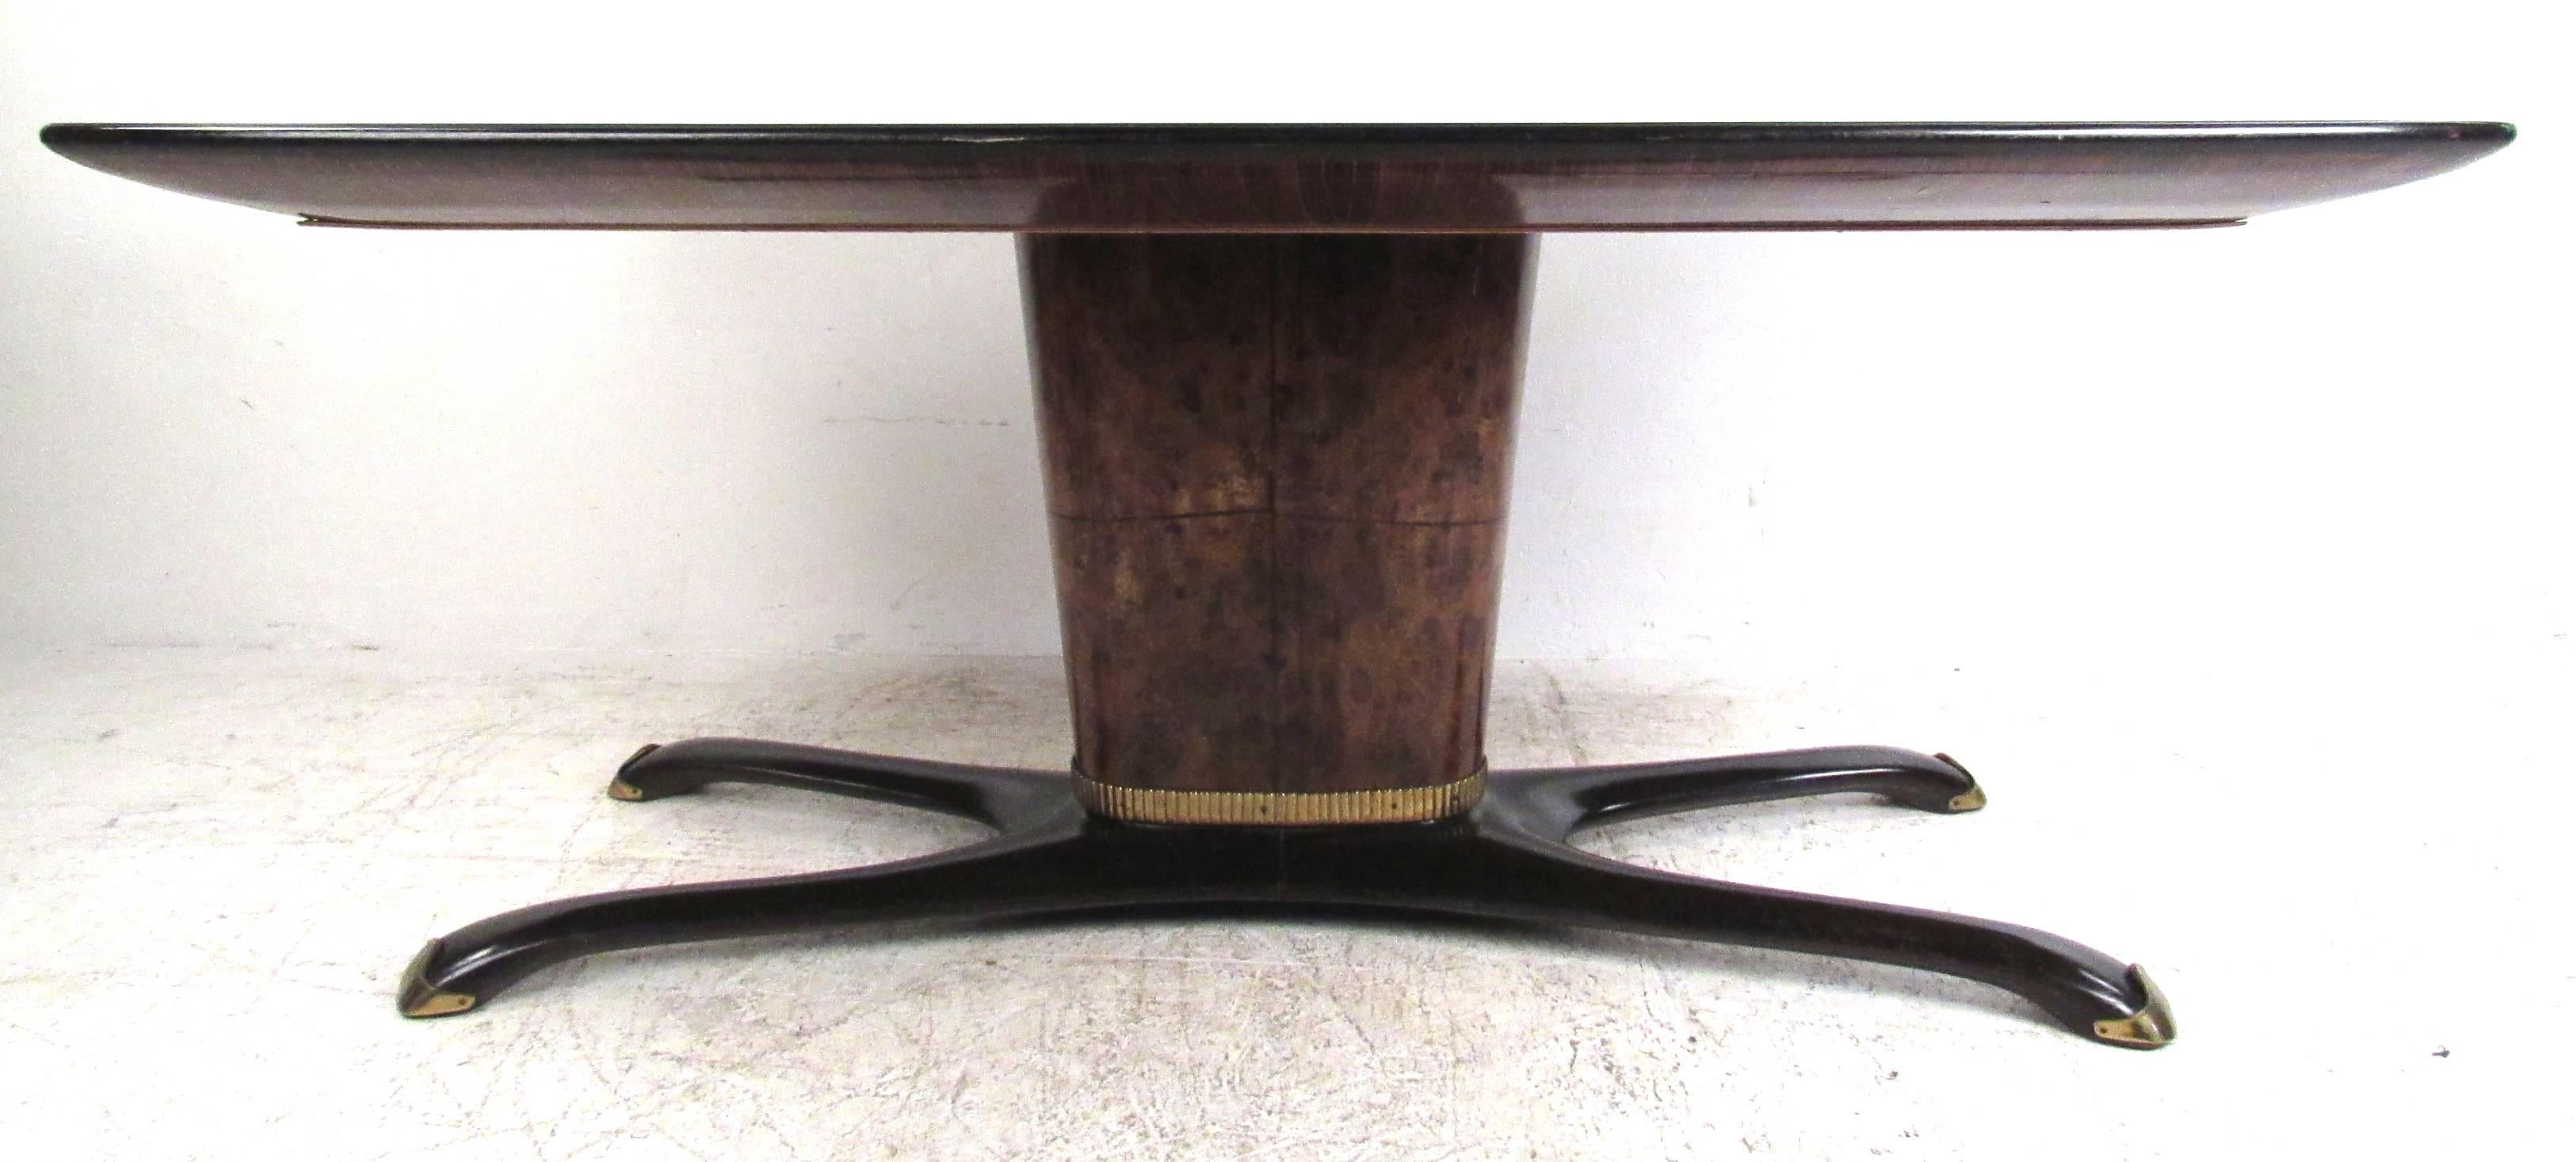 Elegant Italian green glass dining table with black ebonized legs, brass accents burl wood base. Please confirm item location (NY or NJ) with dealer.